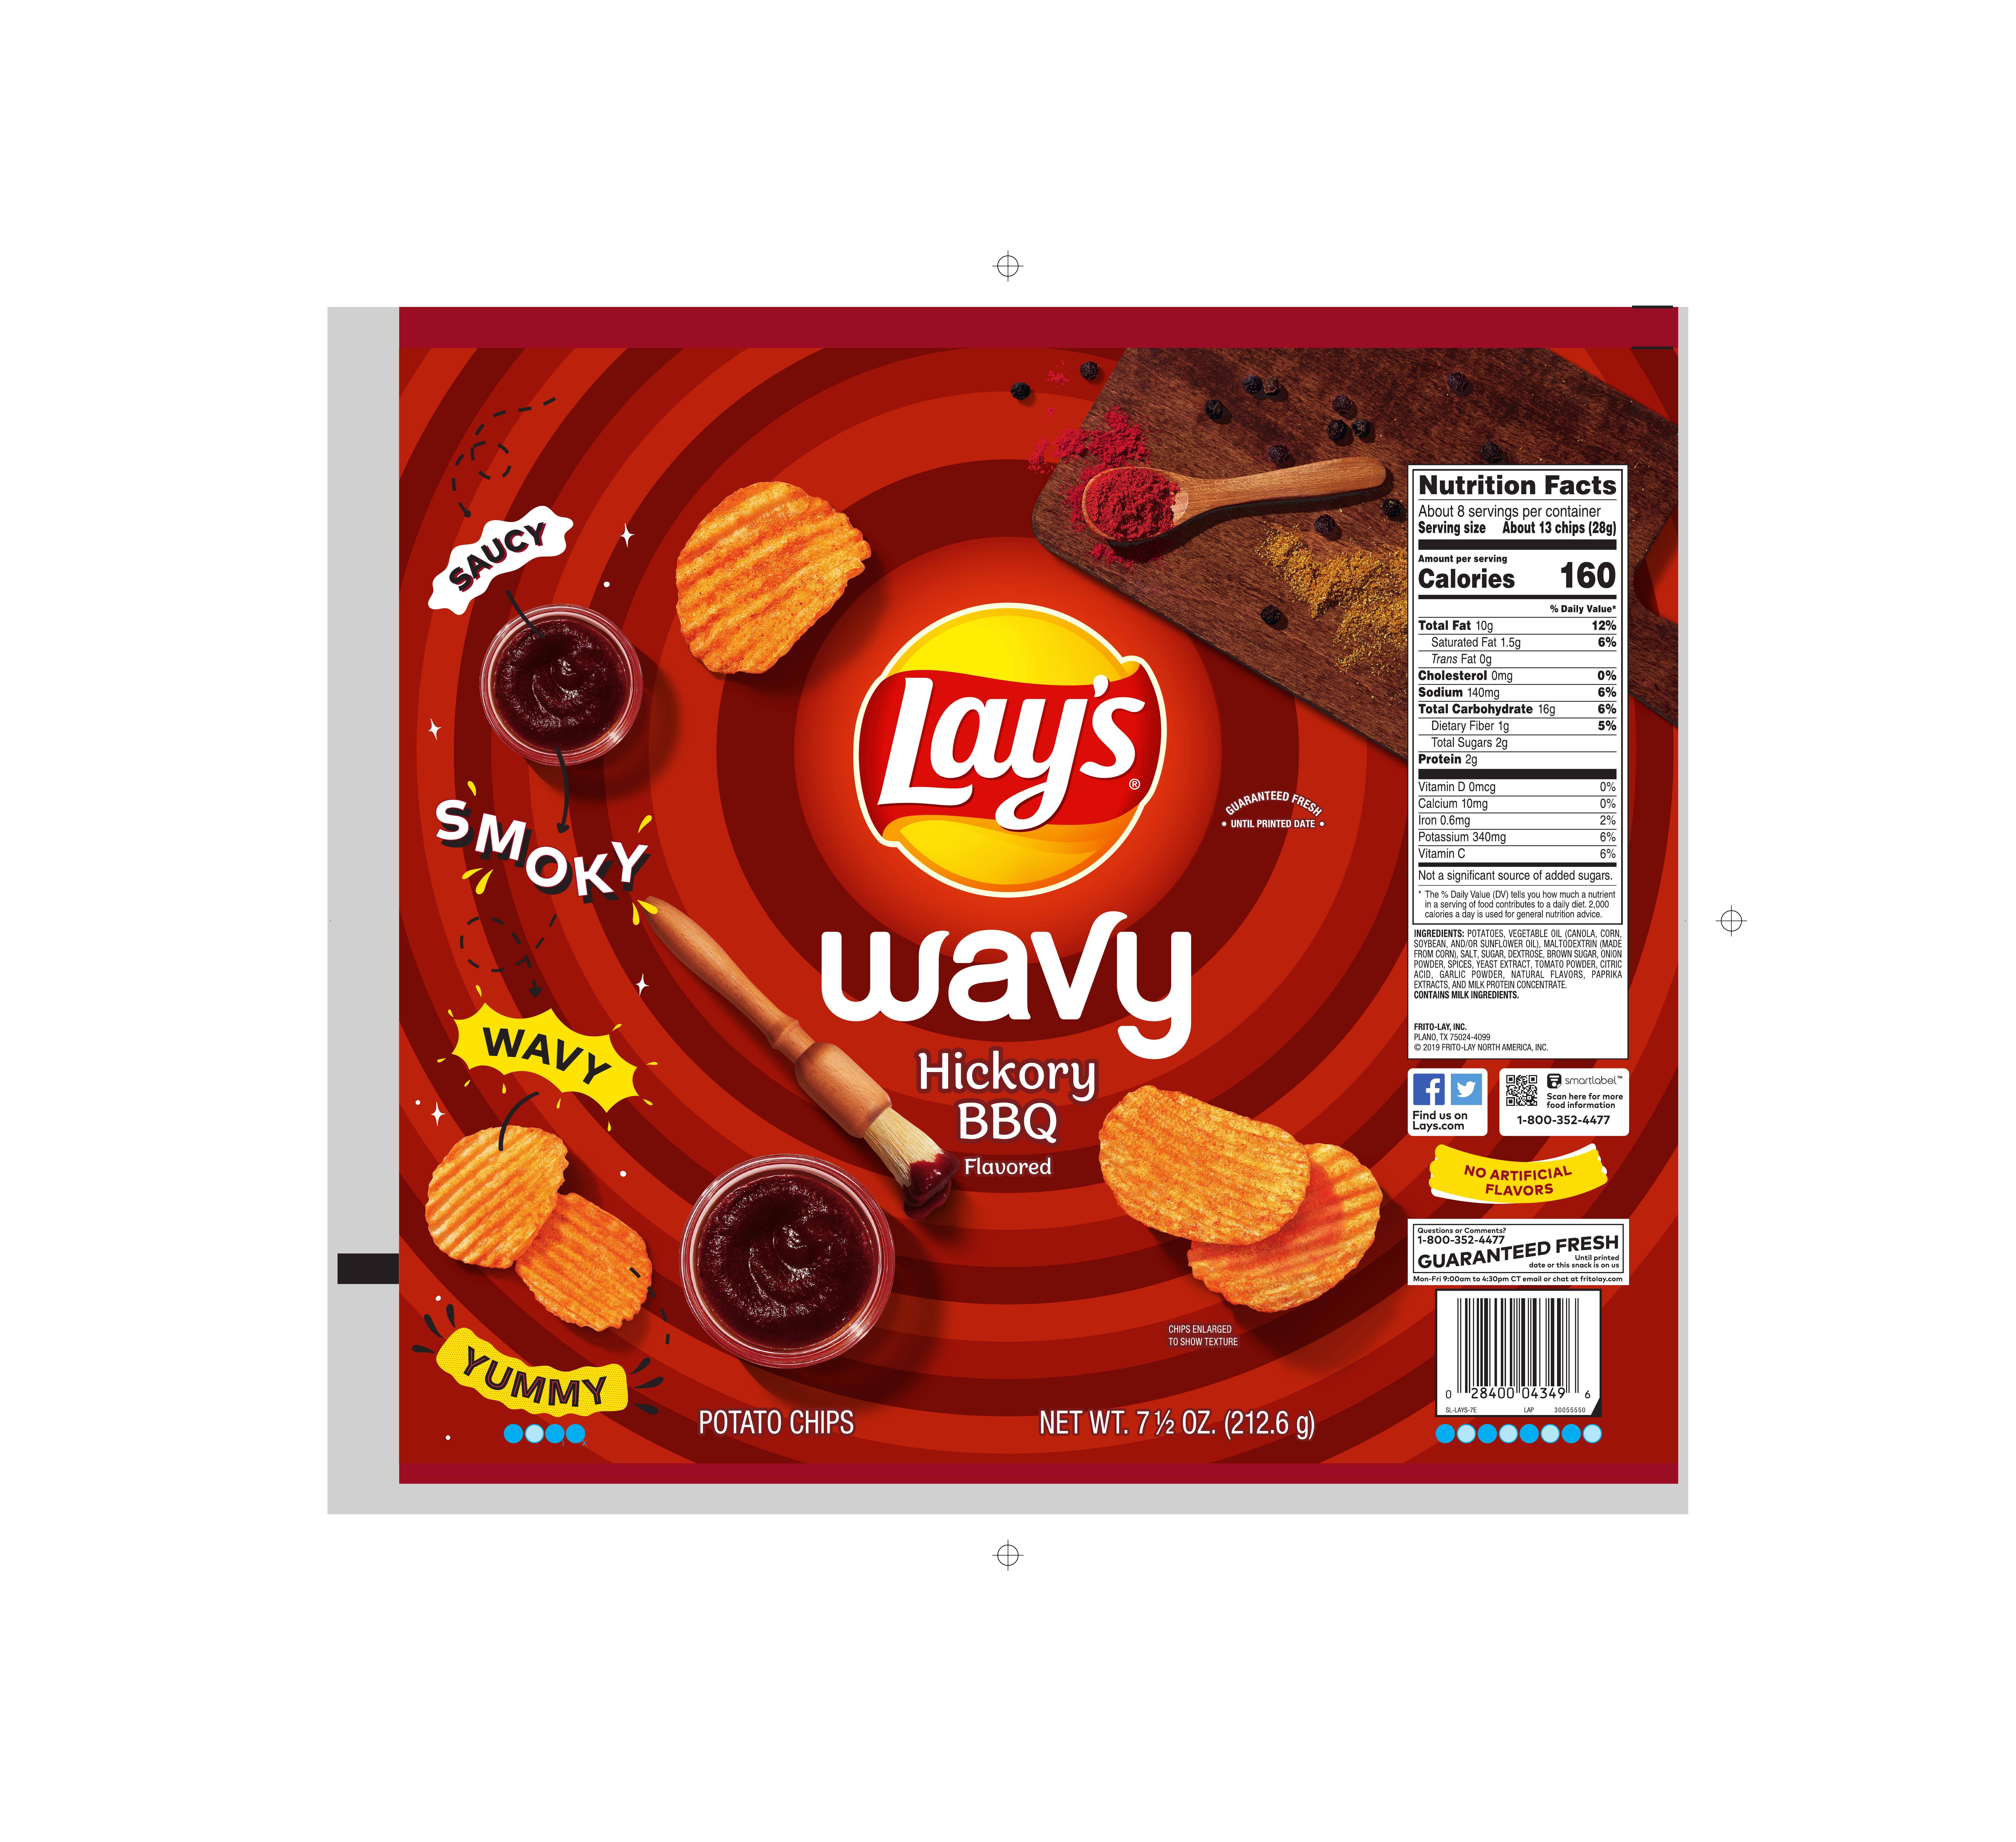 Lays Wavy Hickory Barbecue Flavored Potato Chips, 7.5 Oz Bag